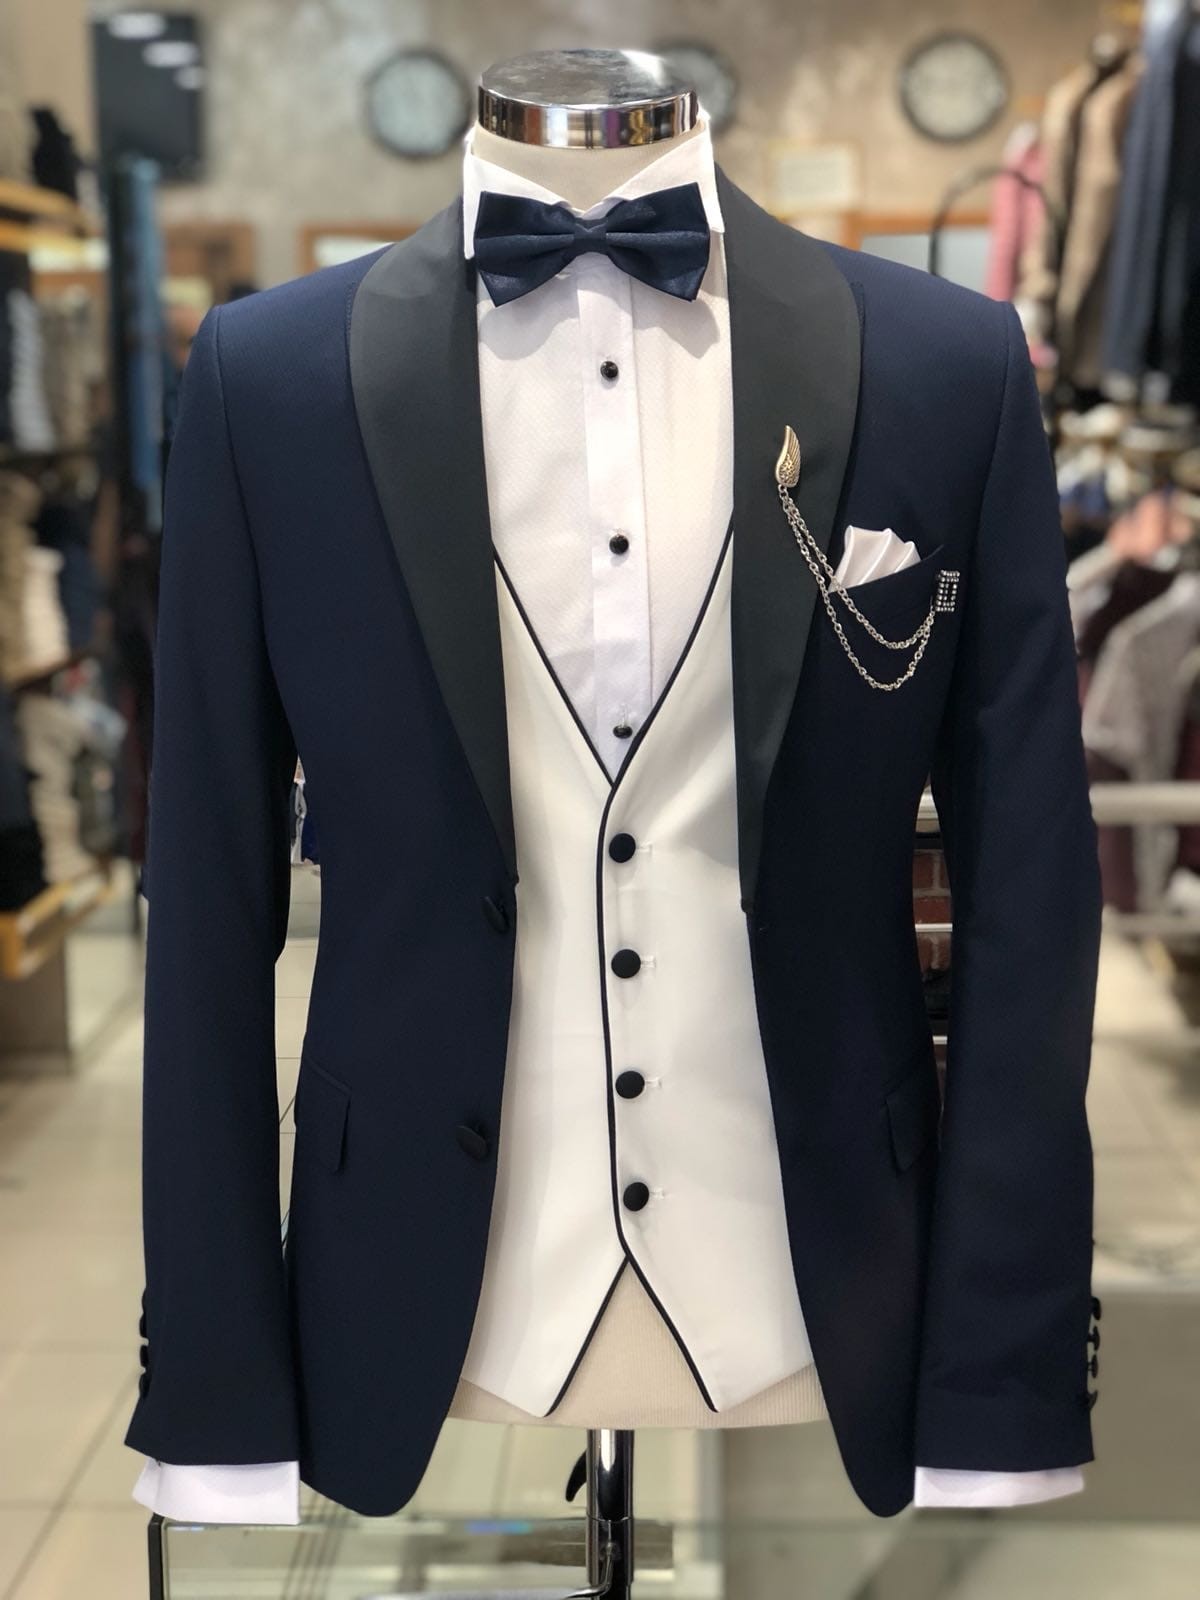 Buy Navy Blue Slim Fit Tuxedo by Gentwith.com with Free Shipping